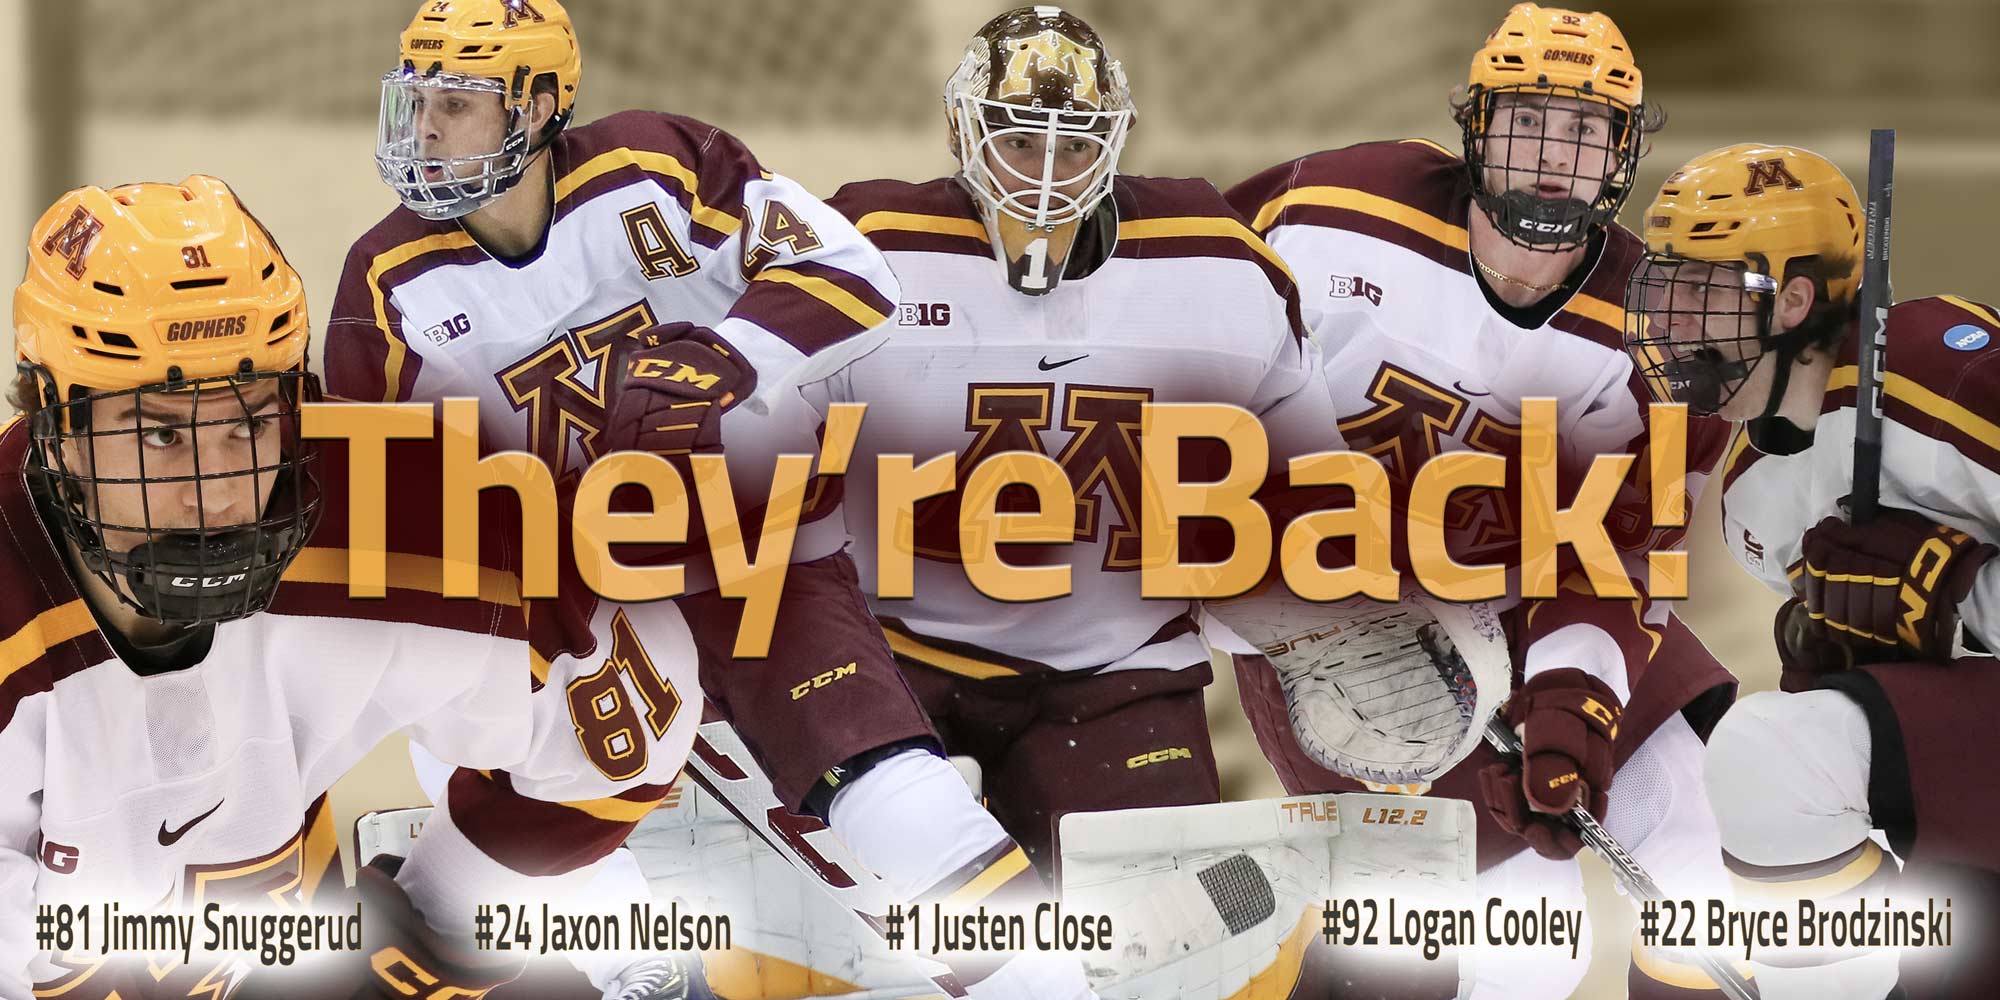 Jimmy Snuggerud, Jaxon Nelson, Justen Close and Logan Cooley all returning to the Gophers for the 2023/24 season.